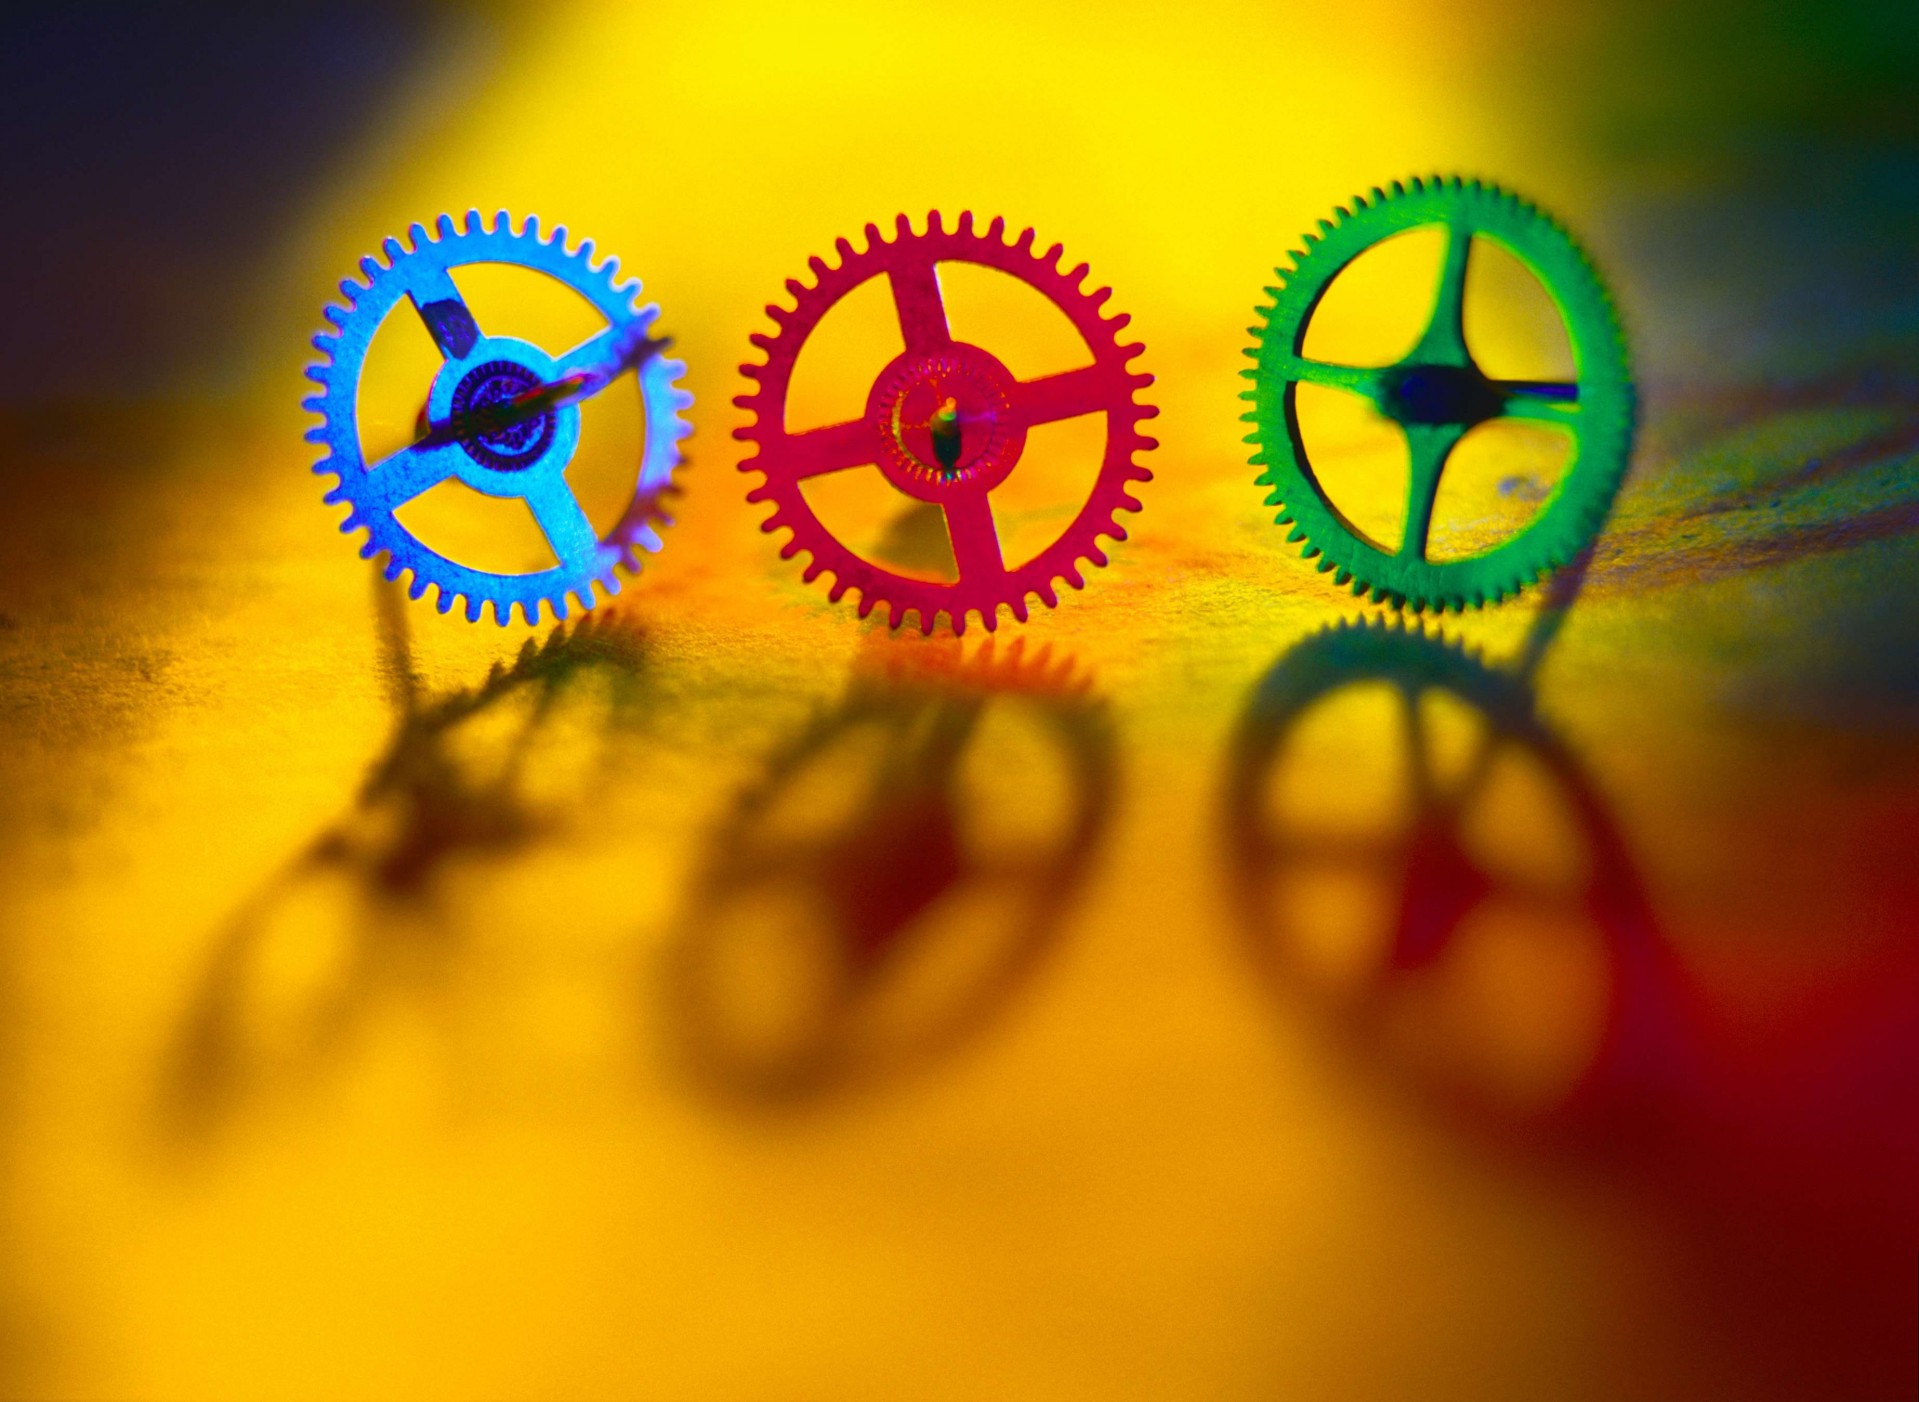 gears background colorful free photo